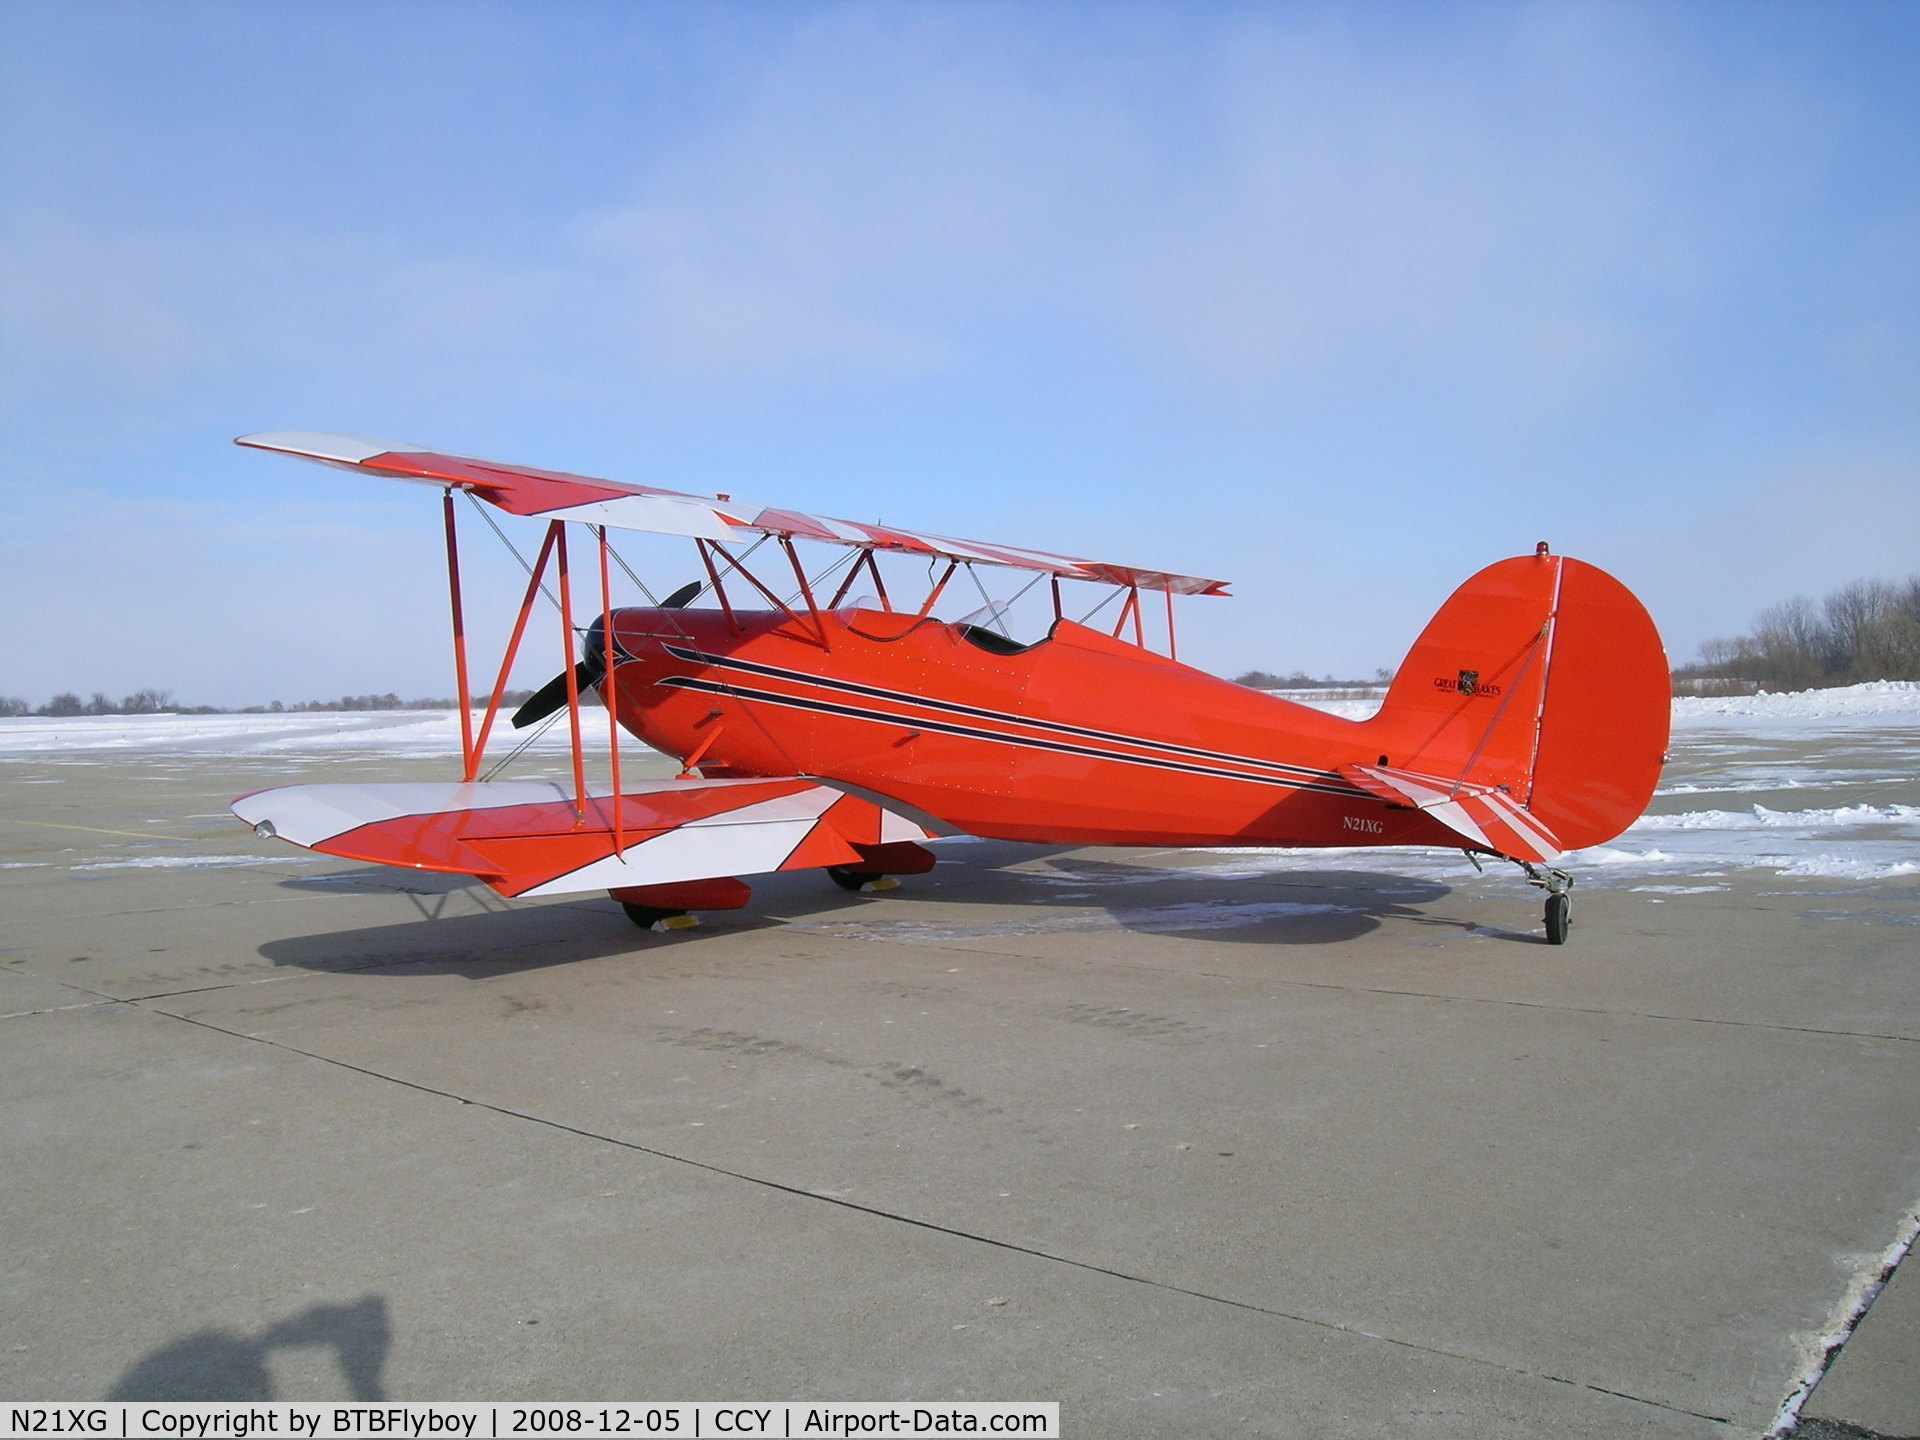 N21XG, 1982 Great Lakes 2T-1A-2 Sport Trainer C/N 1007, on the ramp at Charles City, IA on a very cold and windy day in Dec.